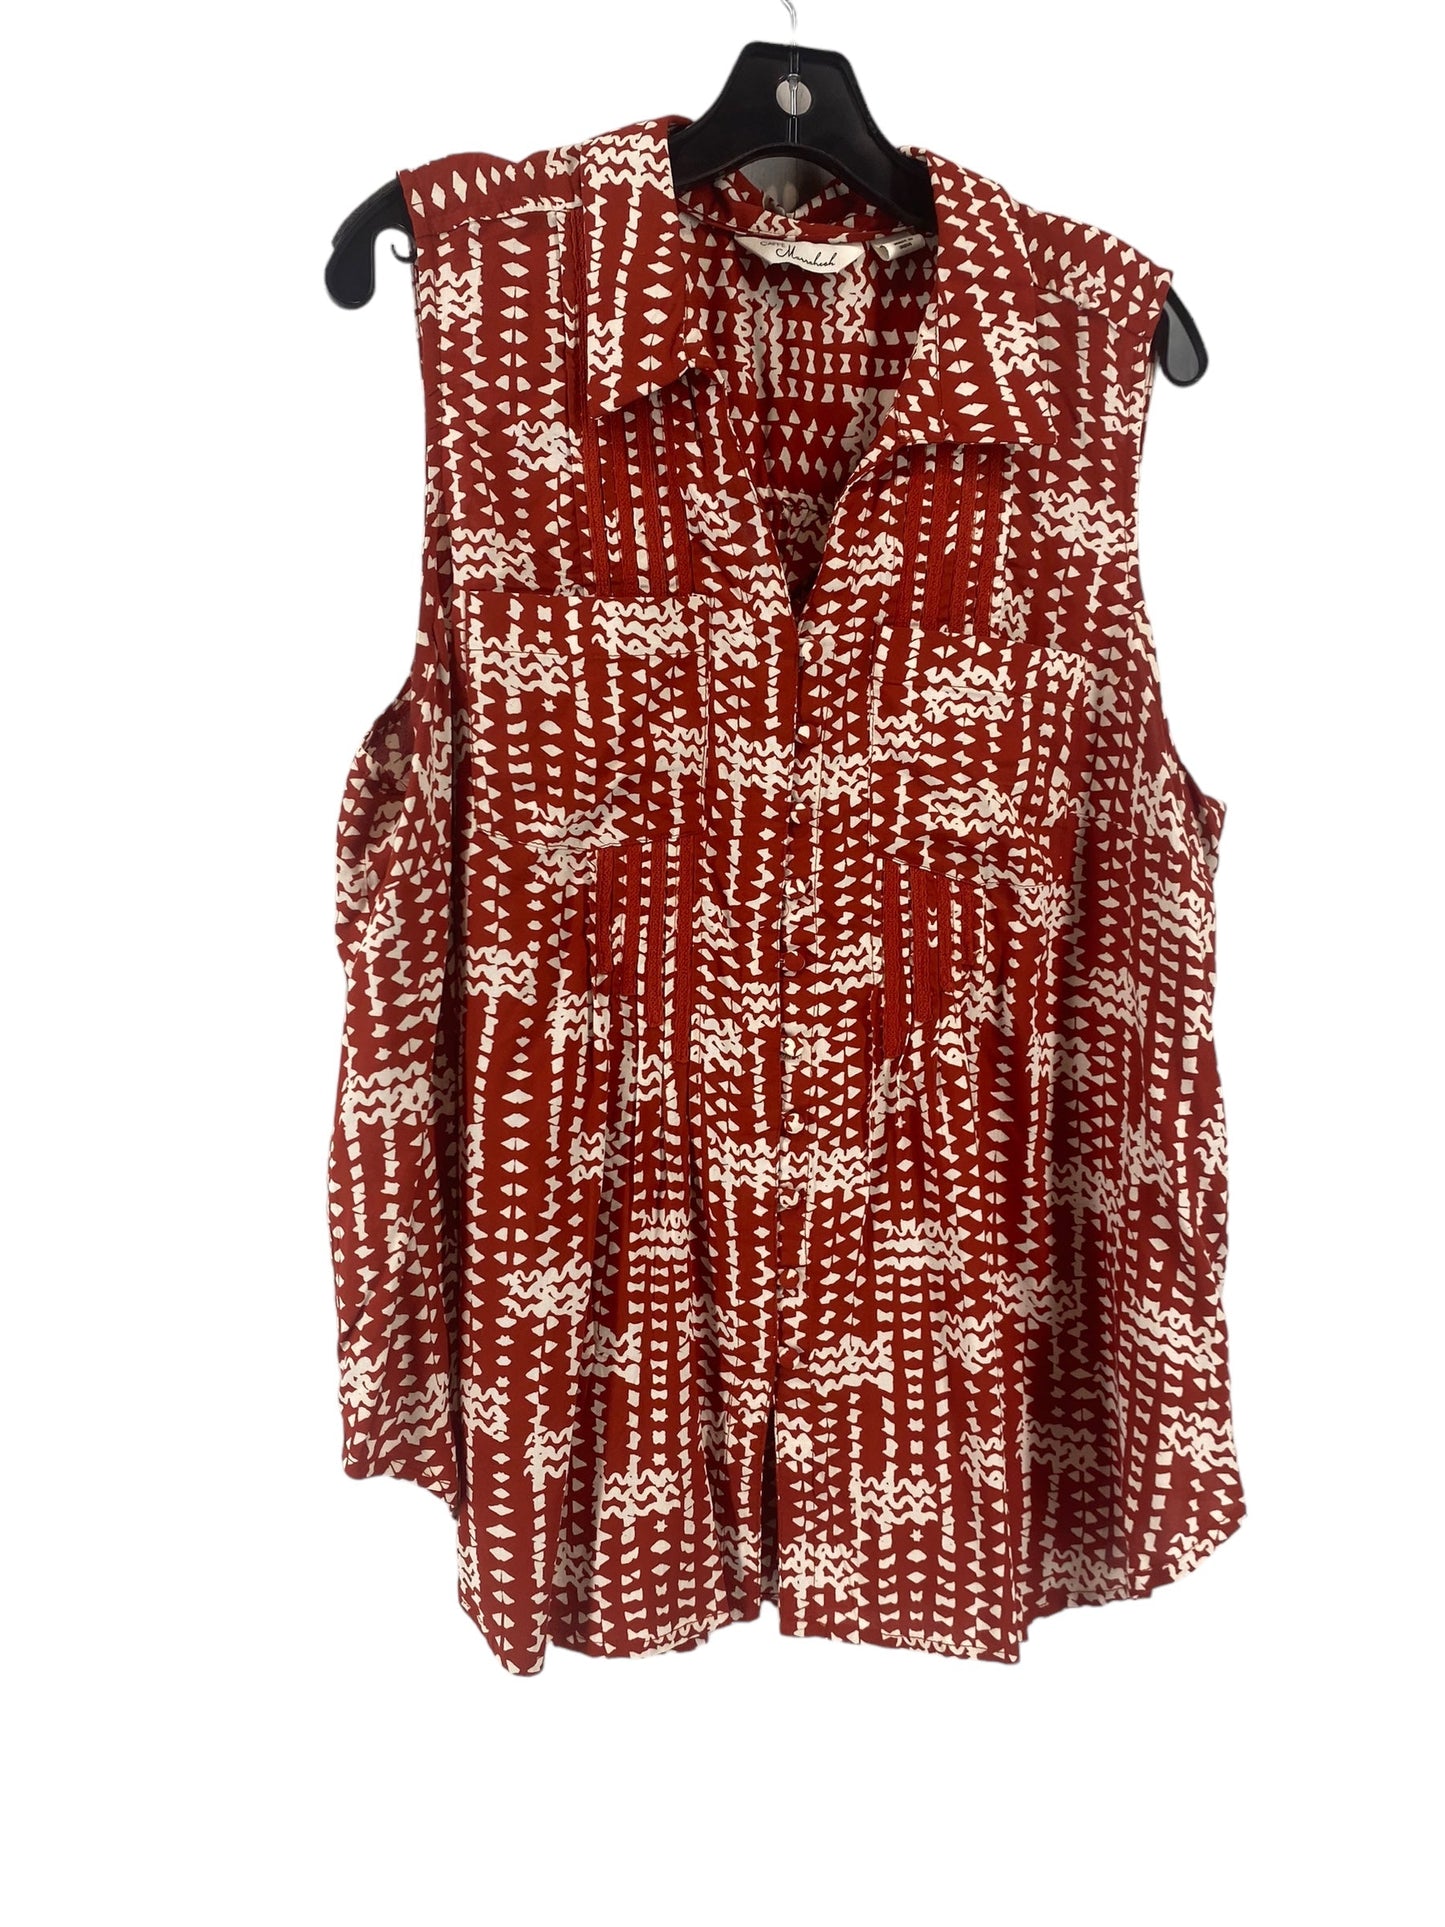 Red & White Top Sleeveless Marrakech, Size L